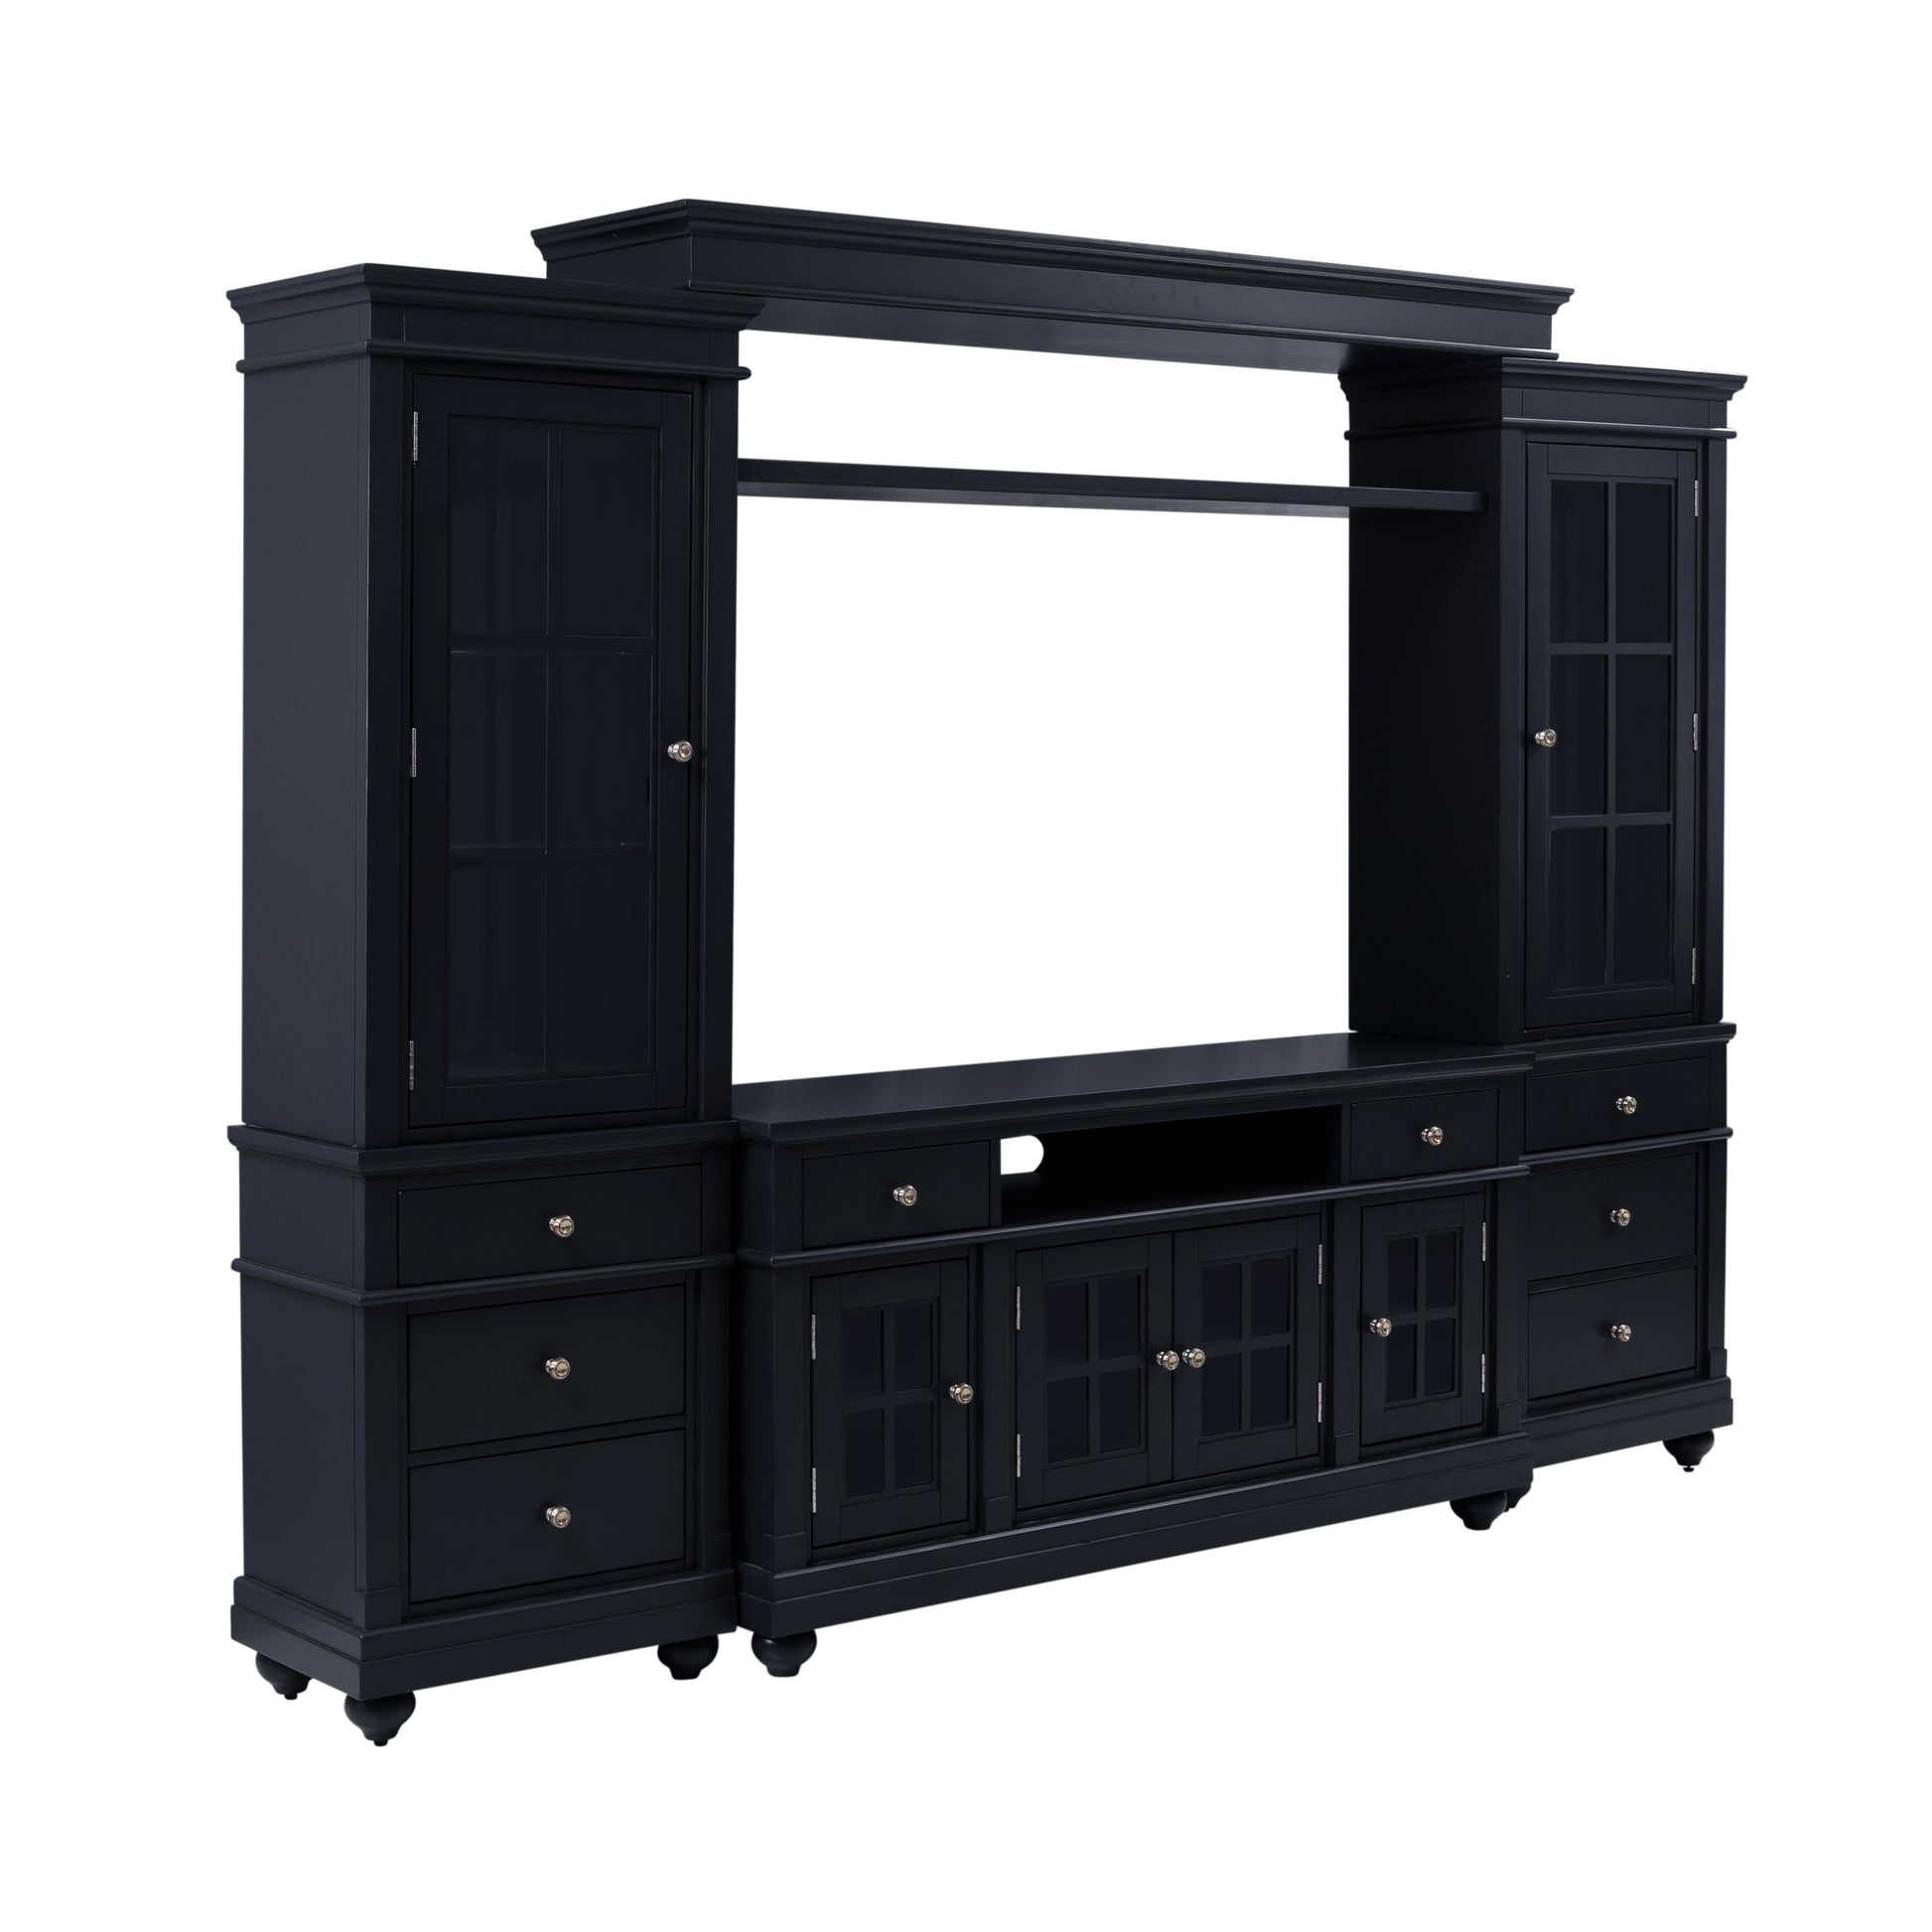 Tov Furniture Hampton Charcoal Entertainment Center for TVs up to 65"